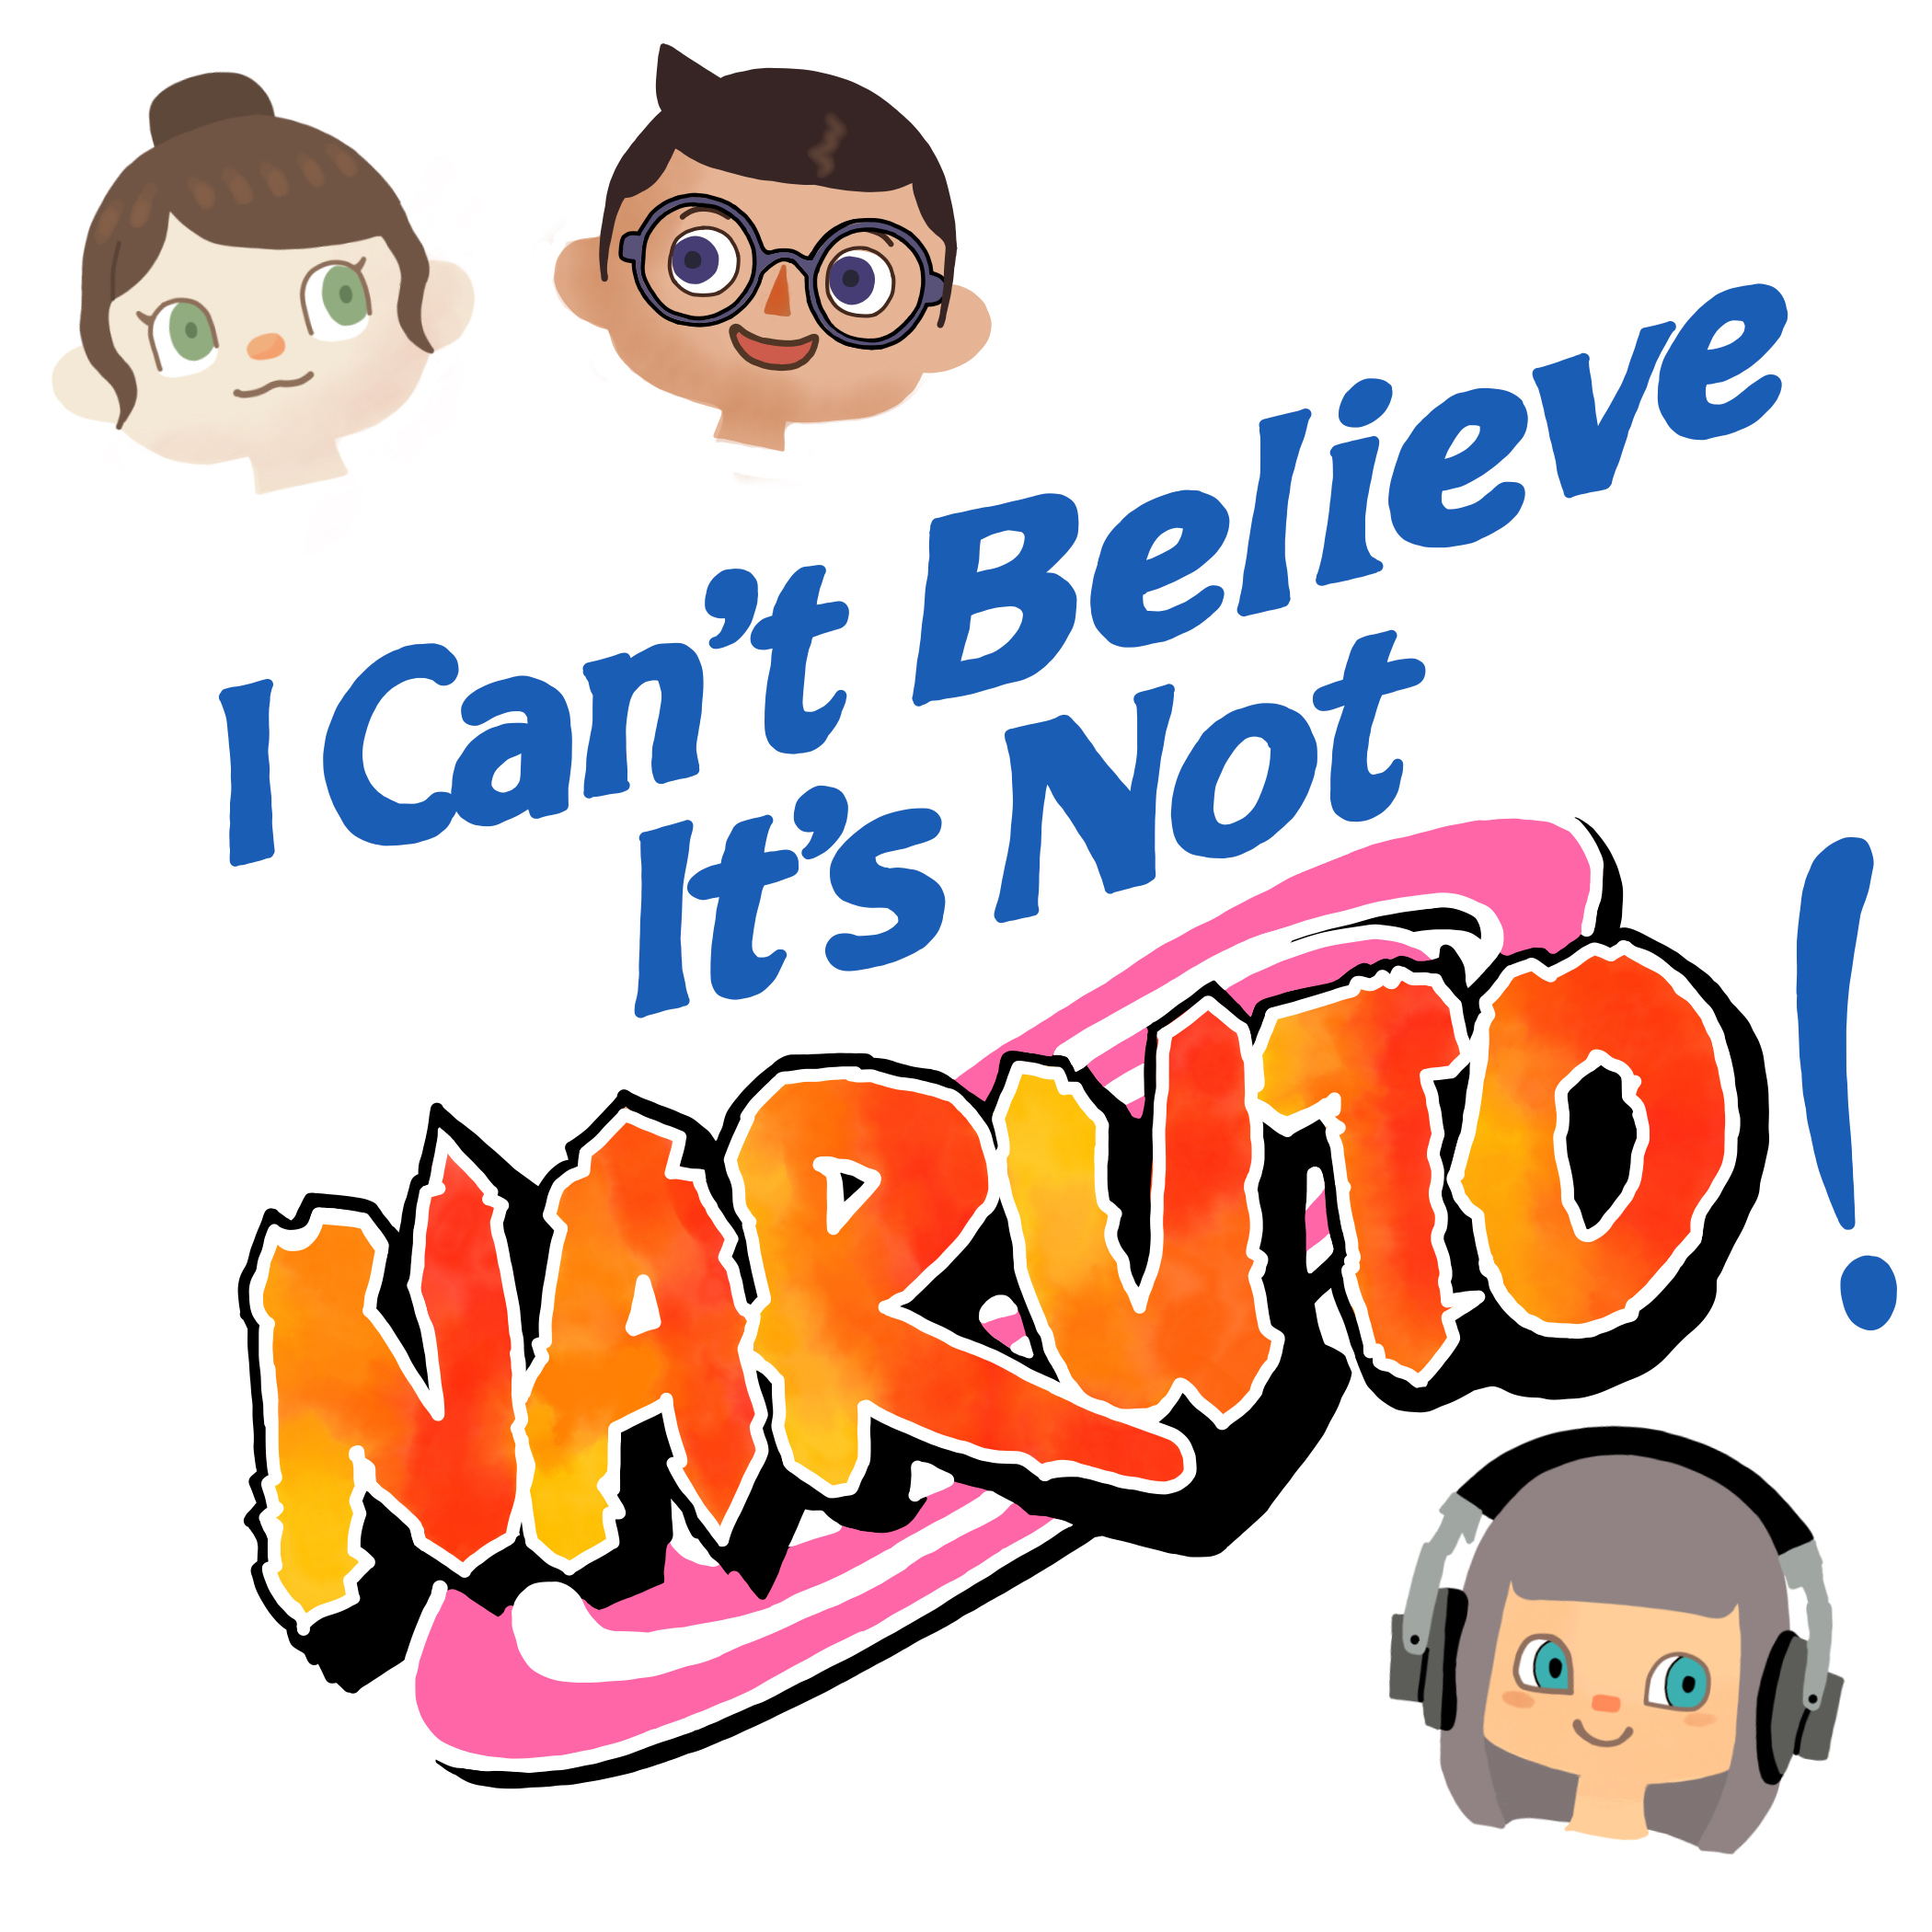 Artwork for I Can't Believe It's Not Naruto!